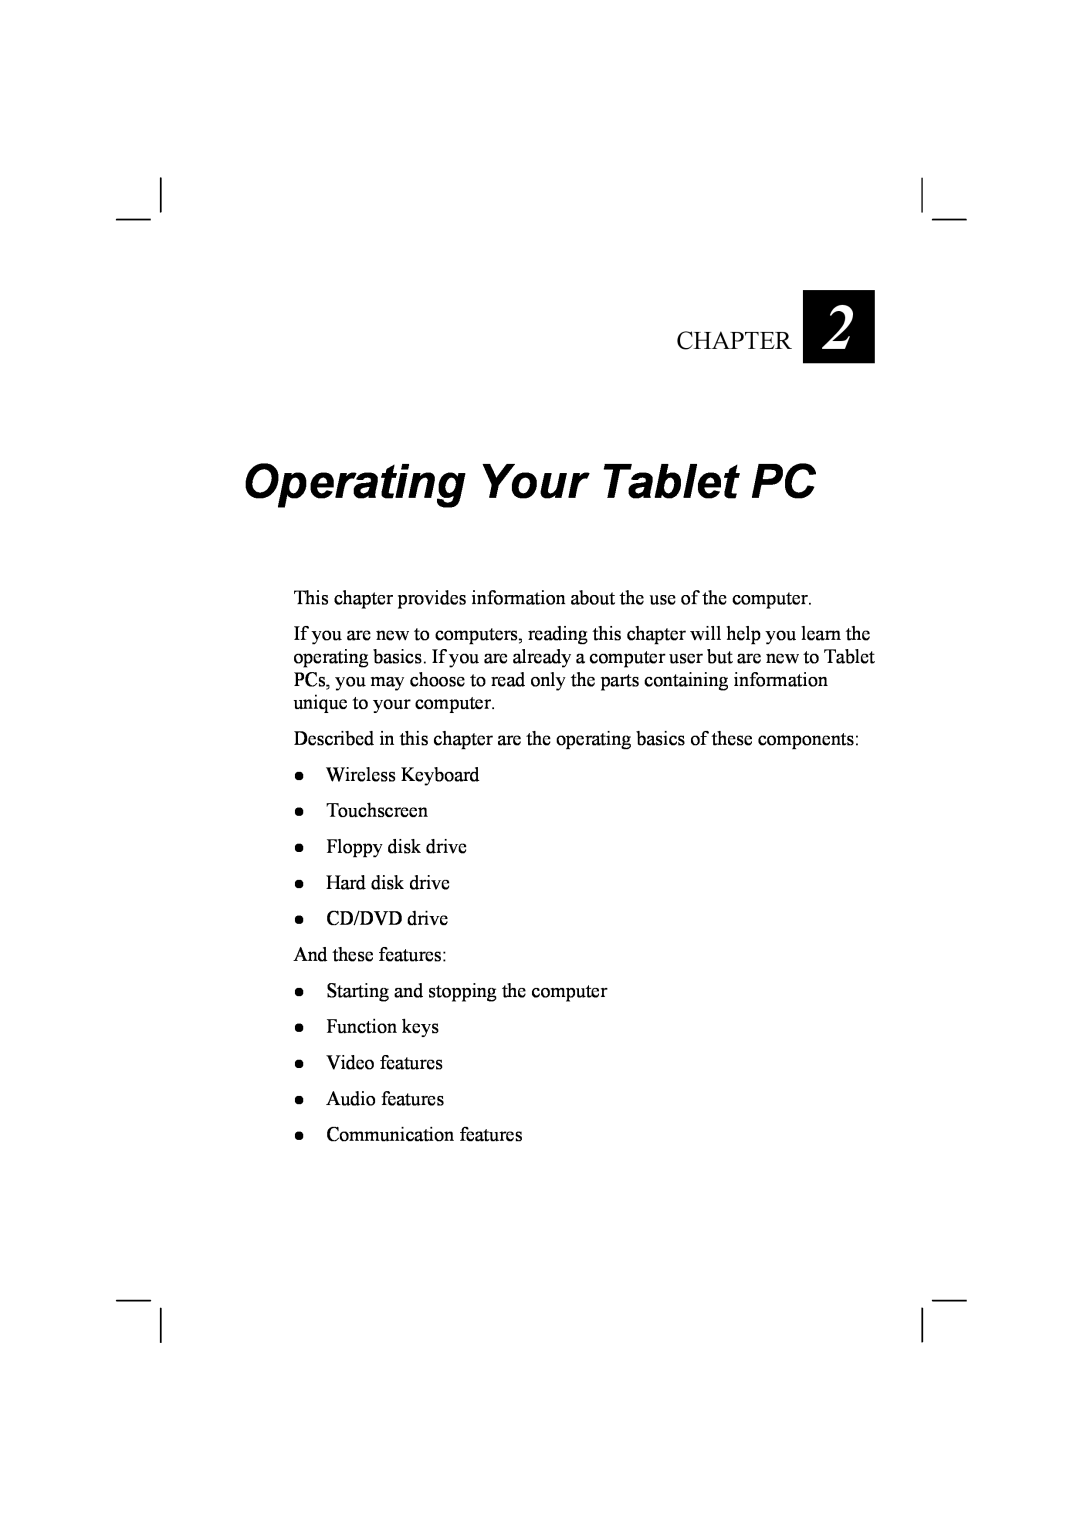 TAG 10 manual Operating Your Tablet PC, Chapter 